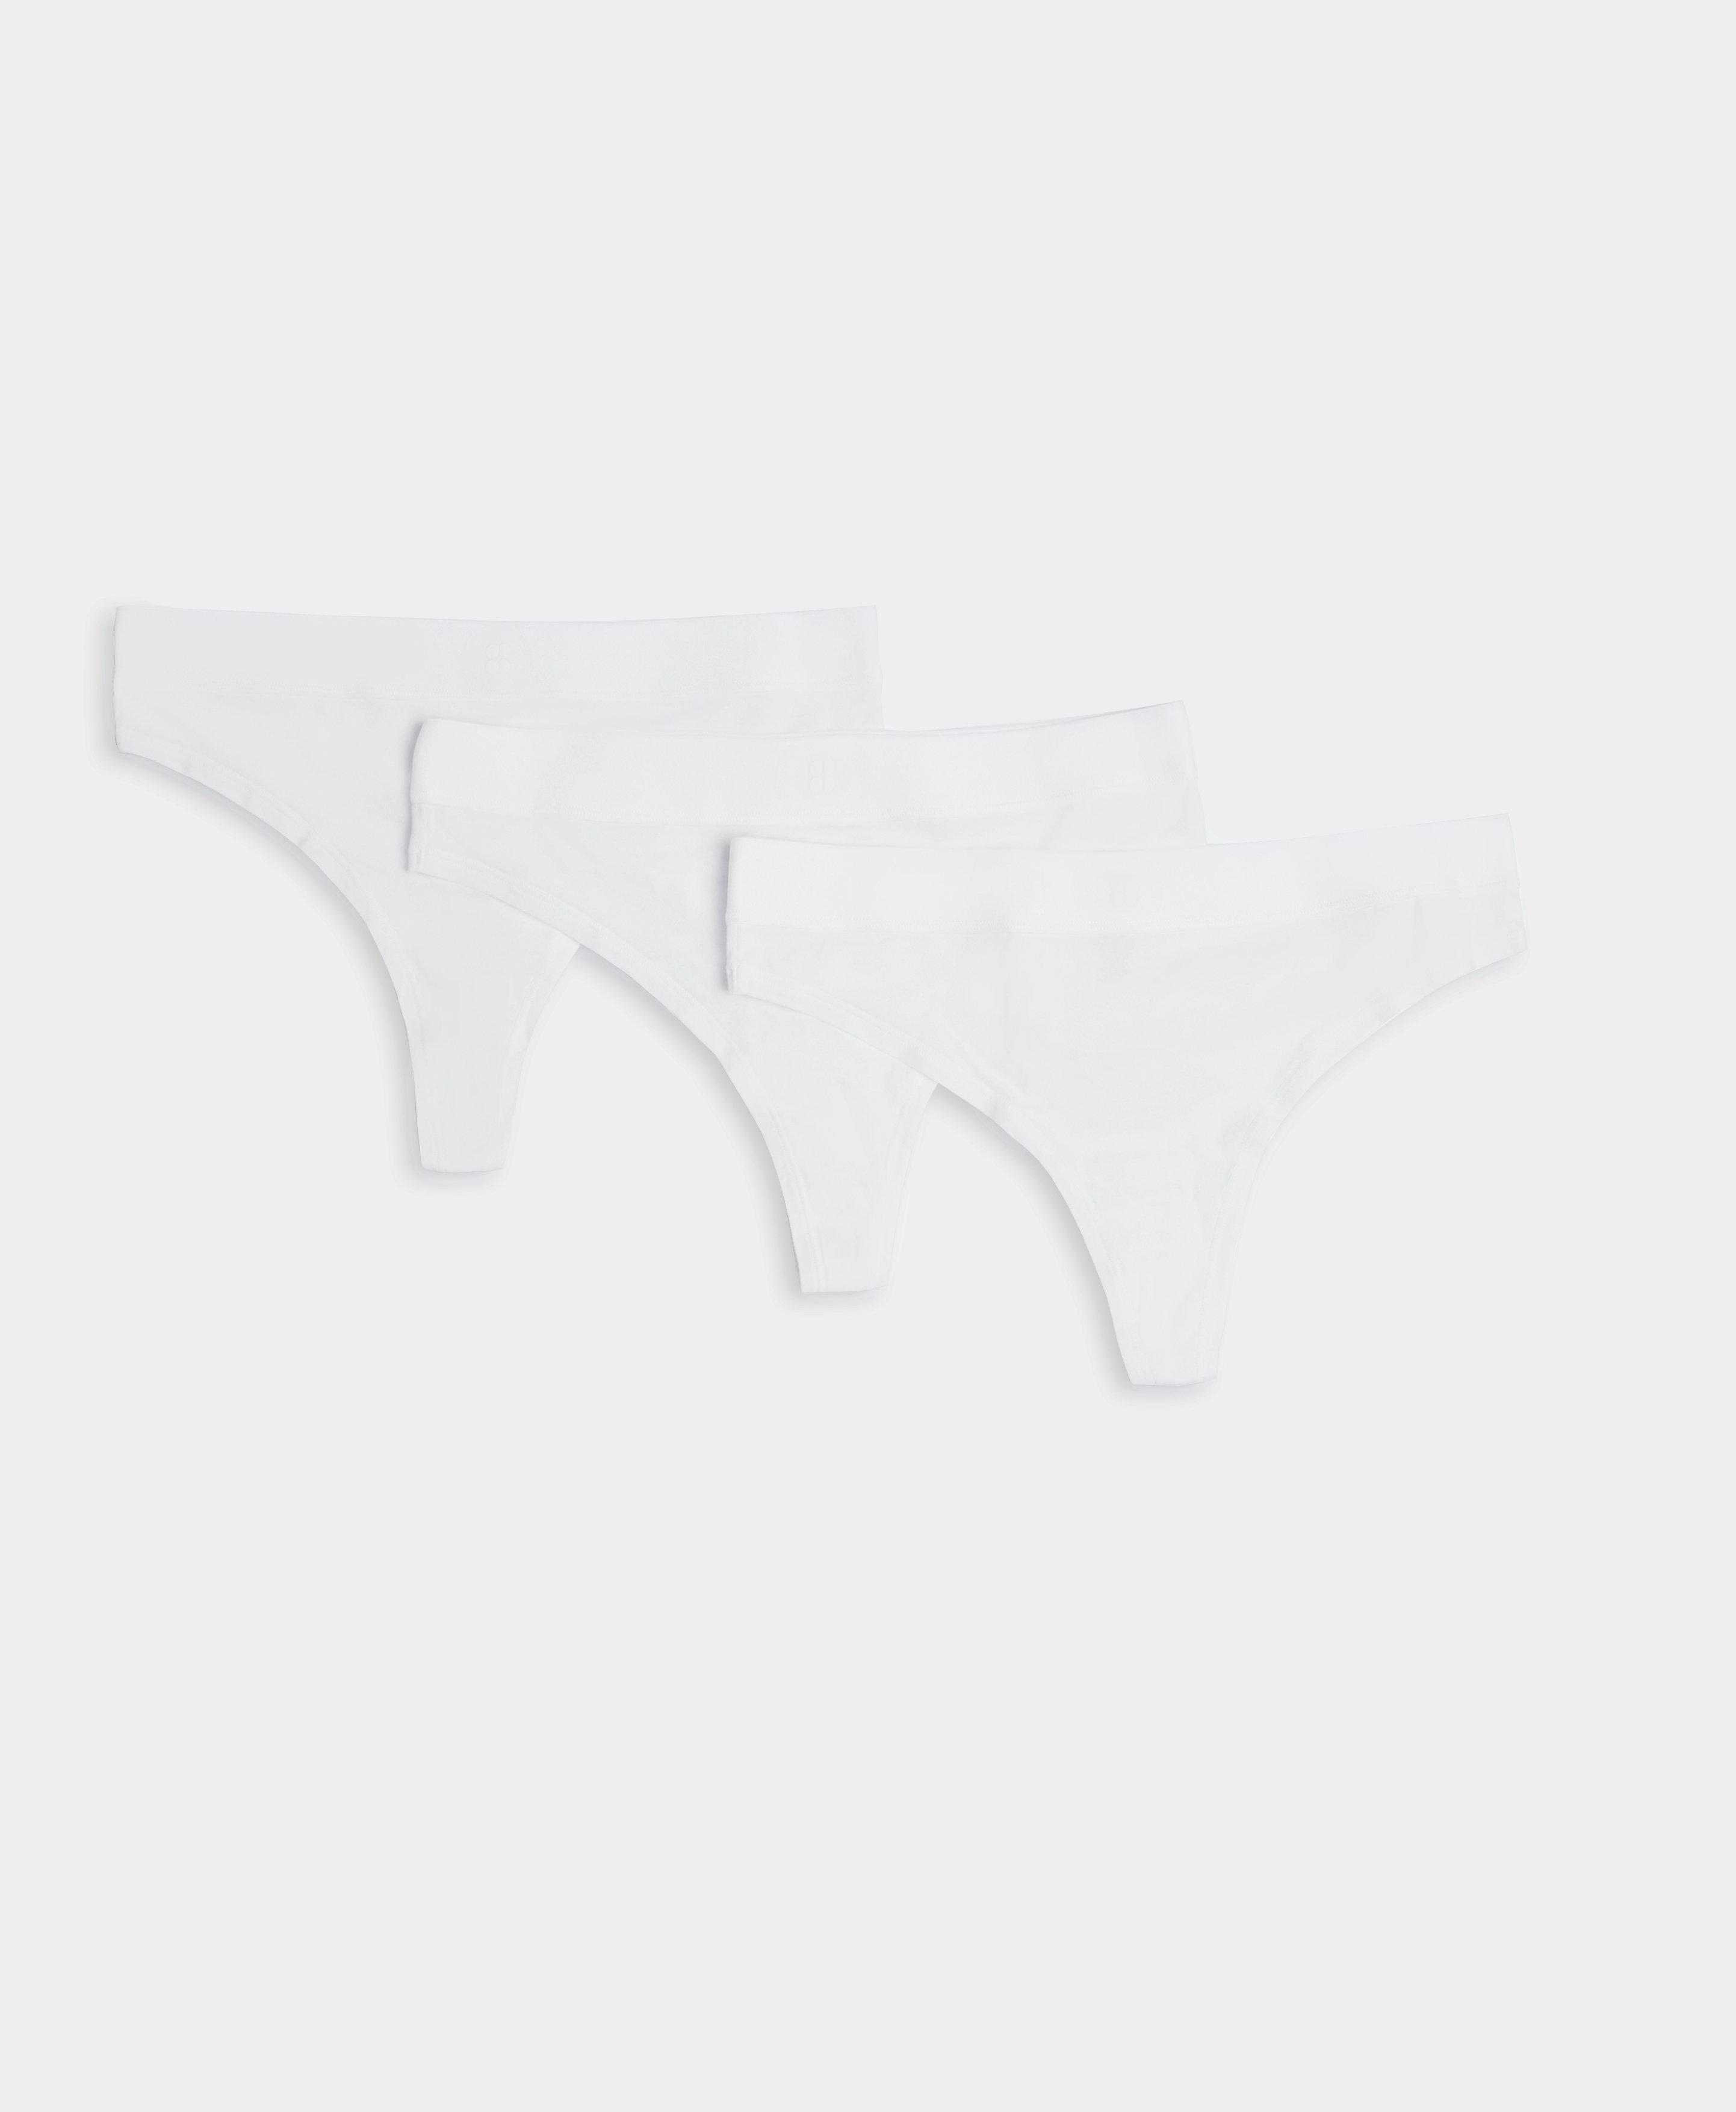 Used cotton thong